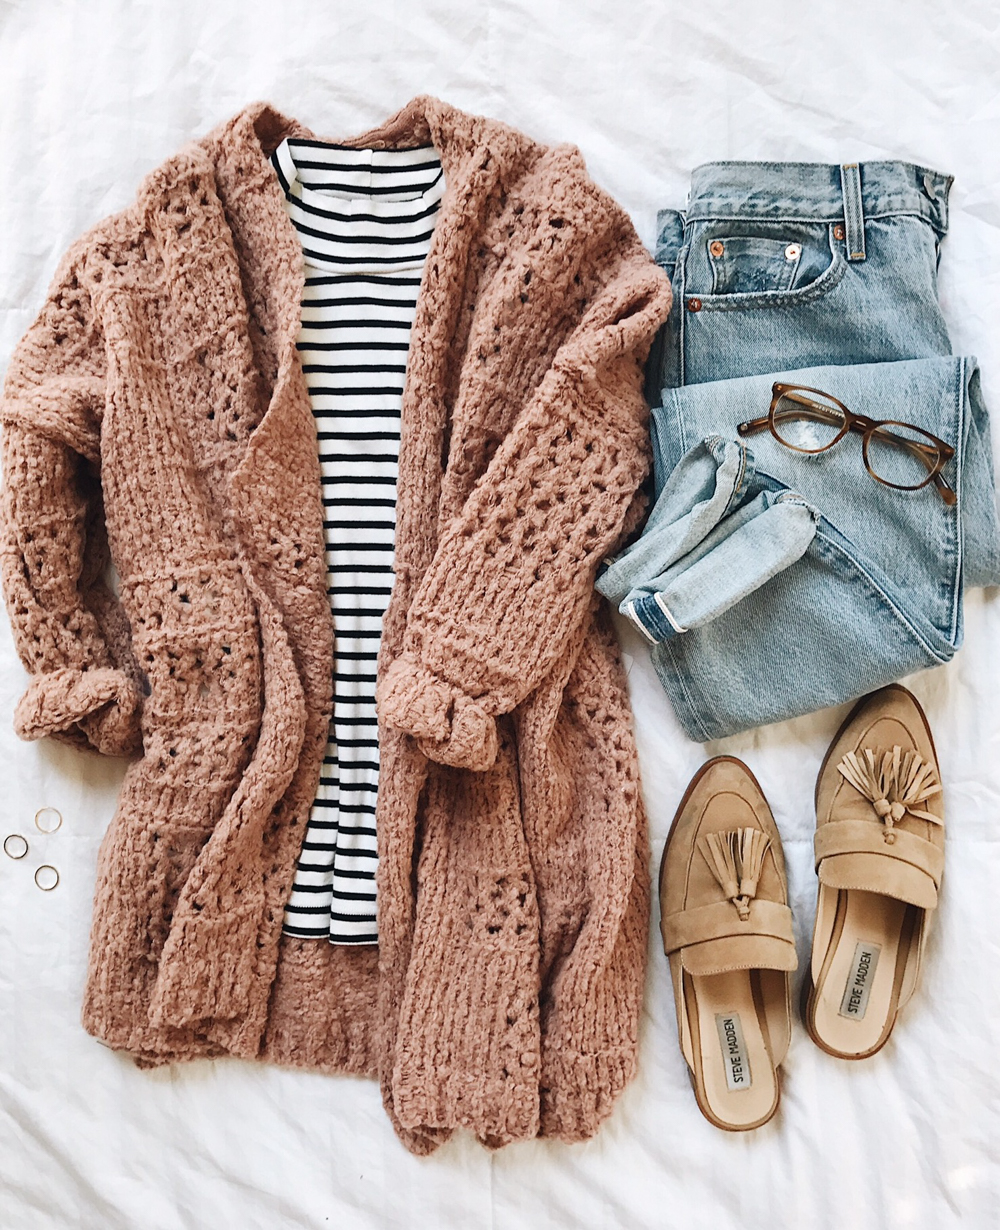 livvyland-blog-olivia-watson-fall-outfit-idea-blush-pink-free-people-cardigan-striped-tee-backless-loafer-slides